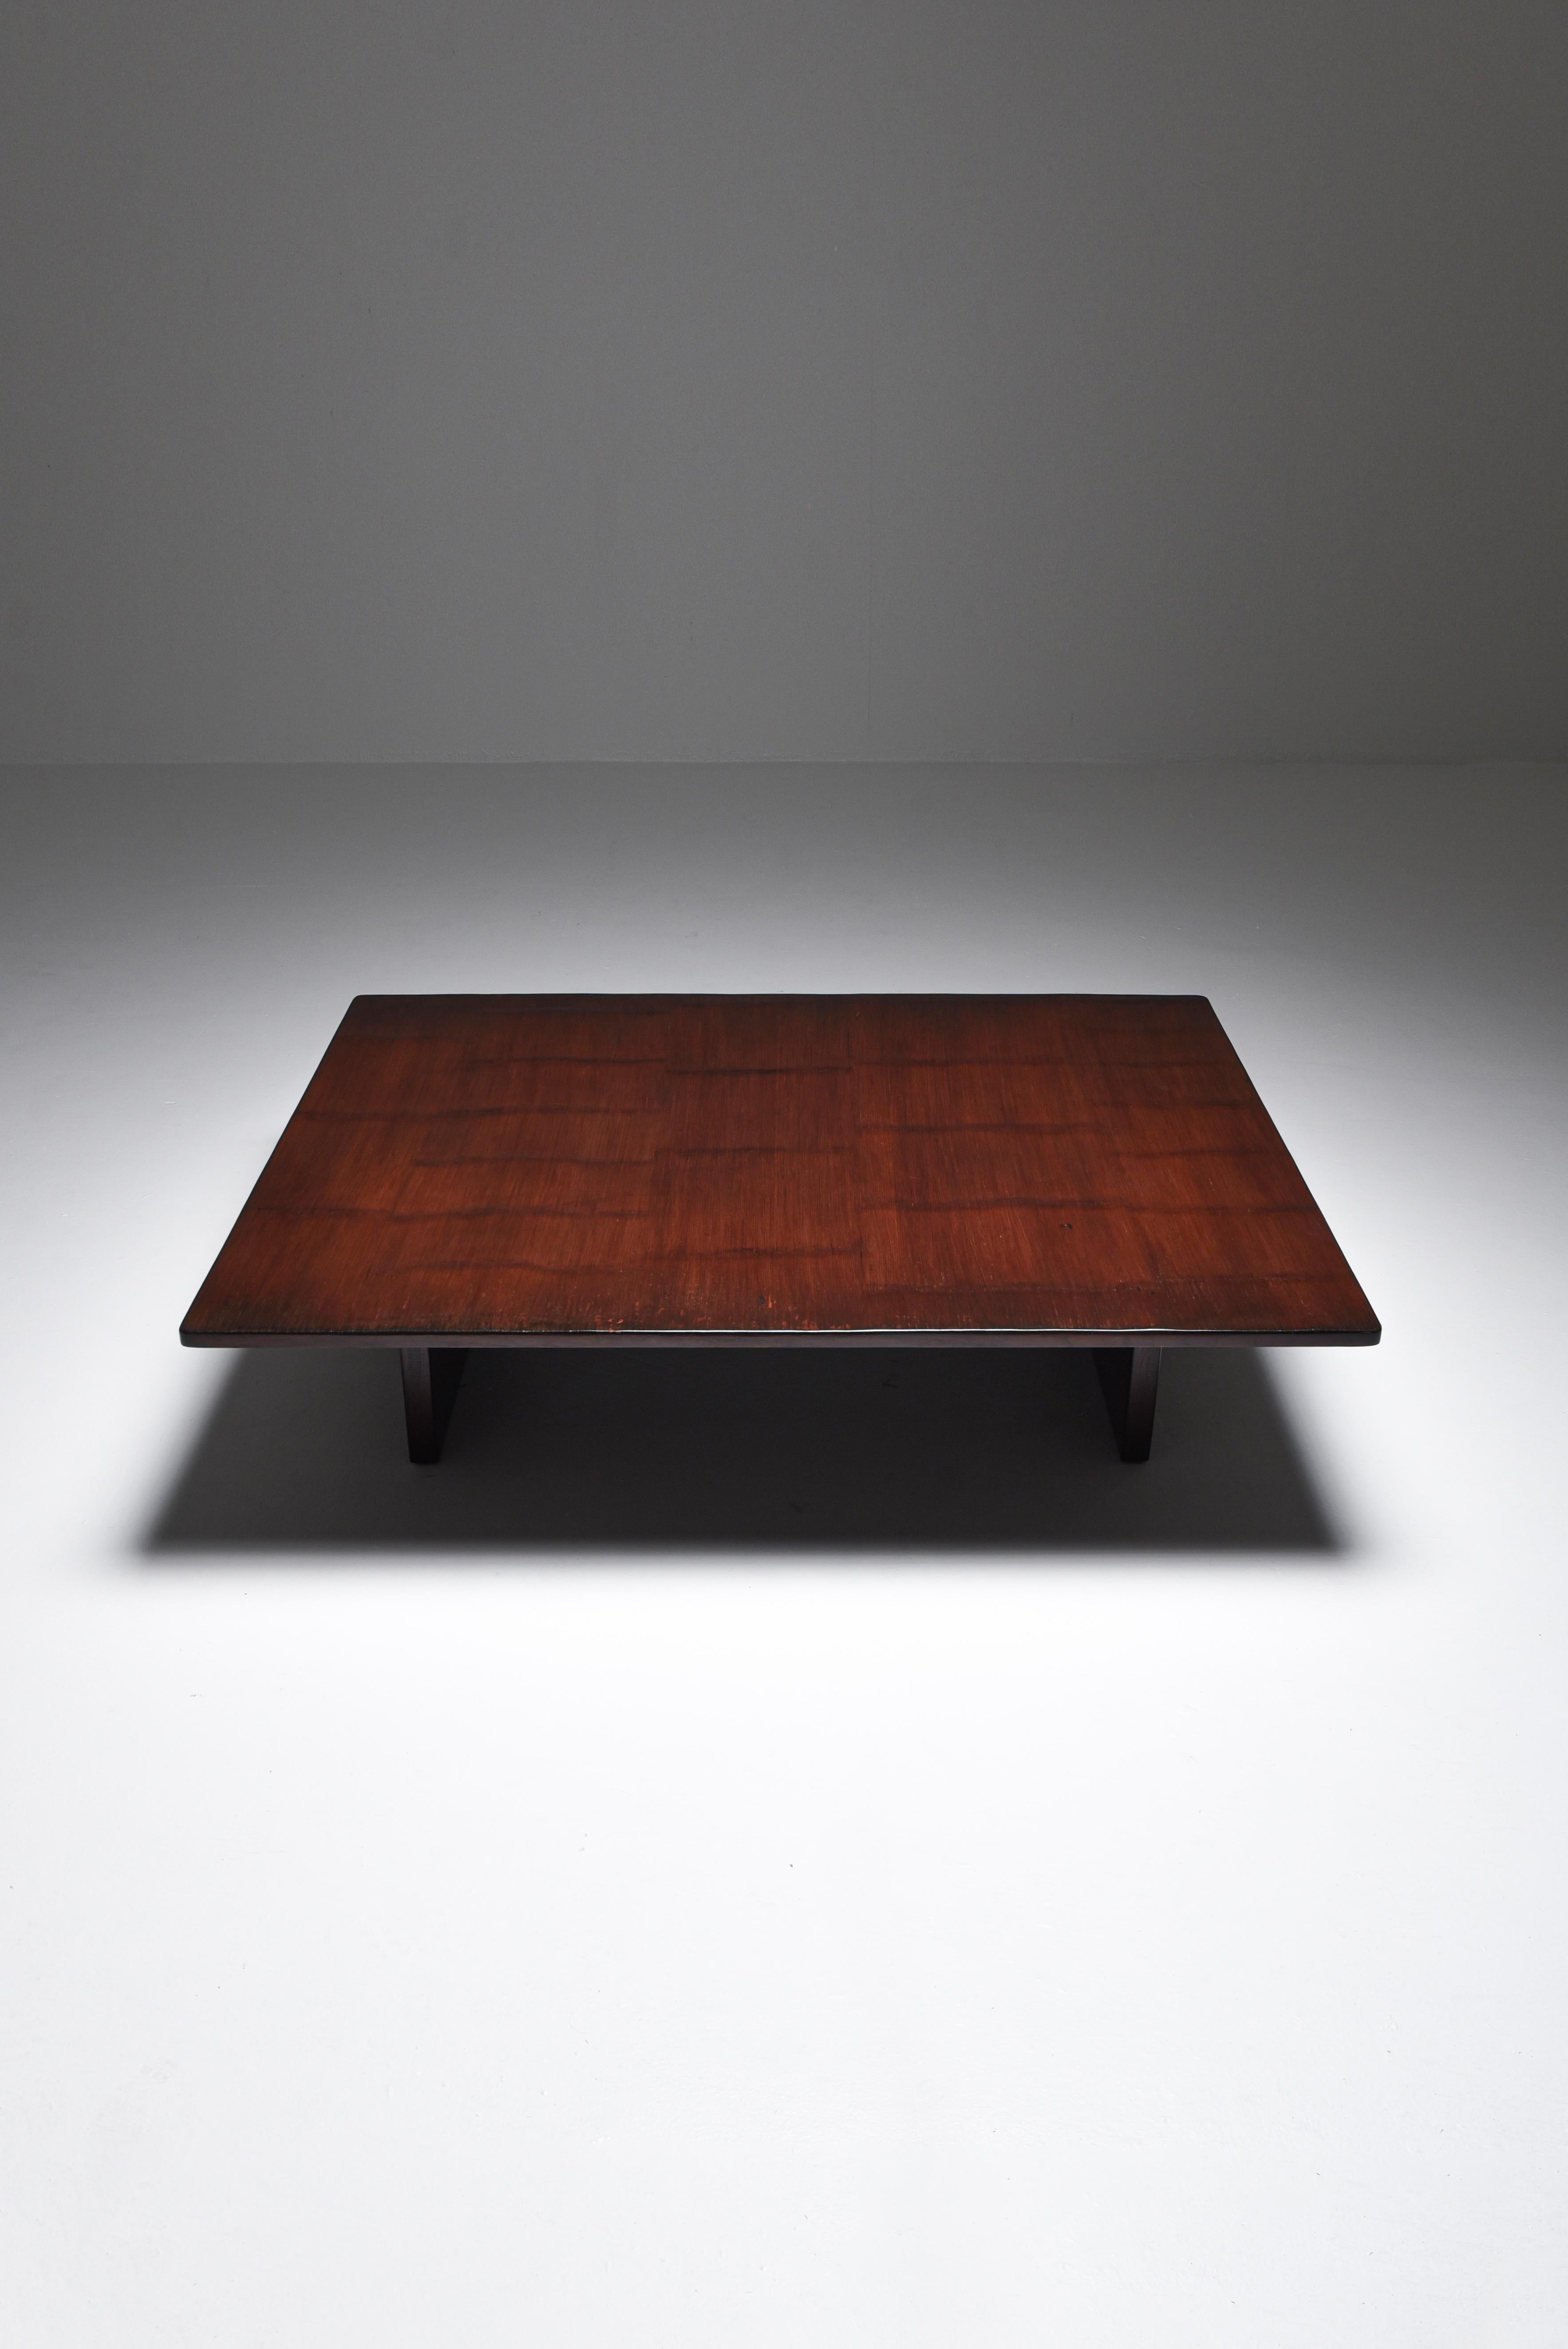 Axel Vervoordt Stained Oak and Bamboo Coffee Table, 1980s 3